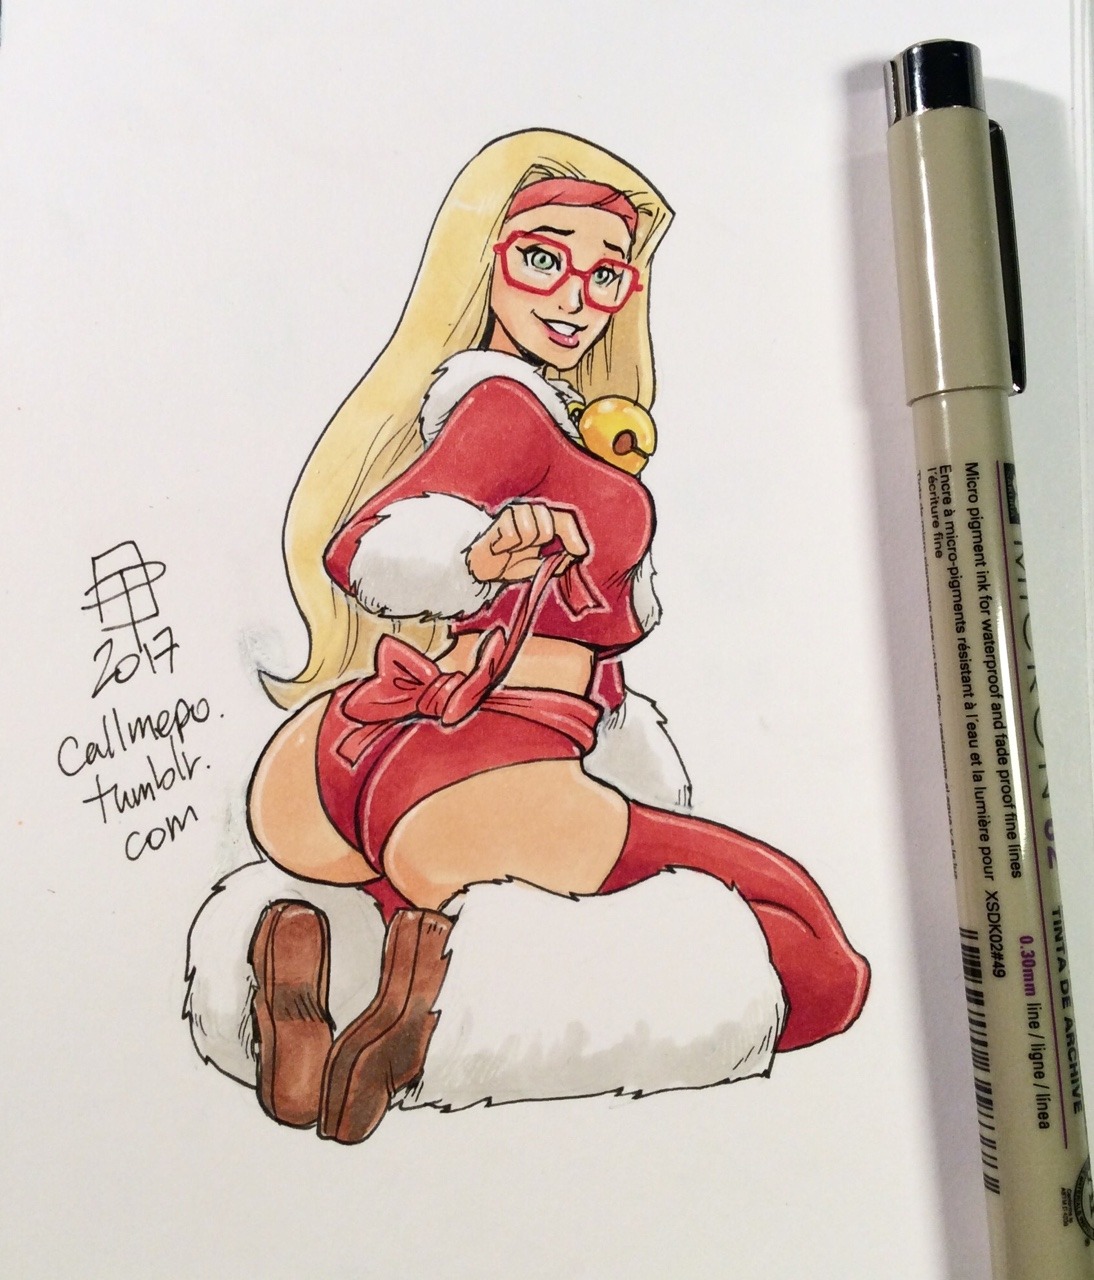 callmepo:Care to warm up with a little Honey Lemon? Holiday Hottie tiny doodle of